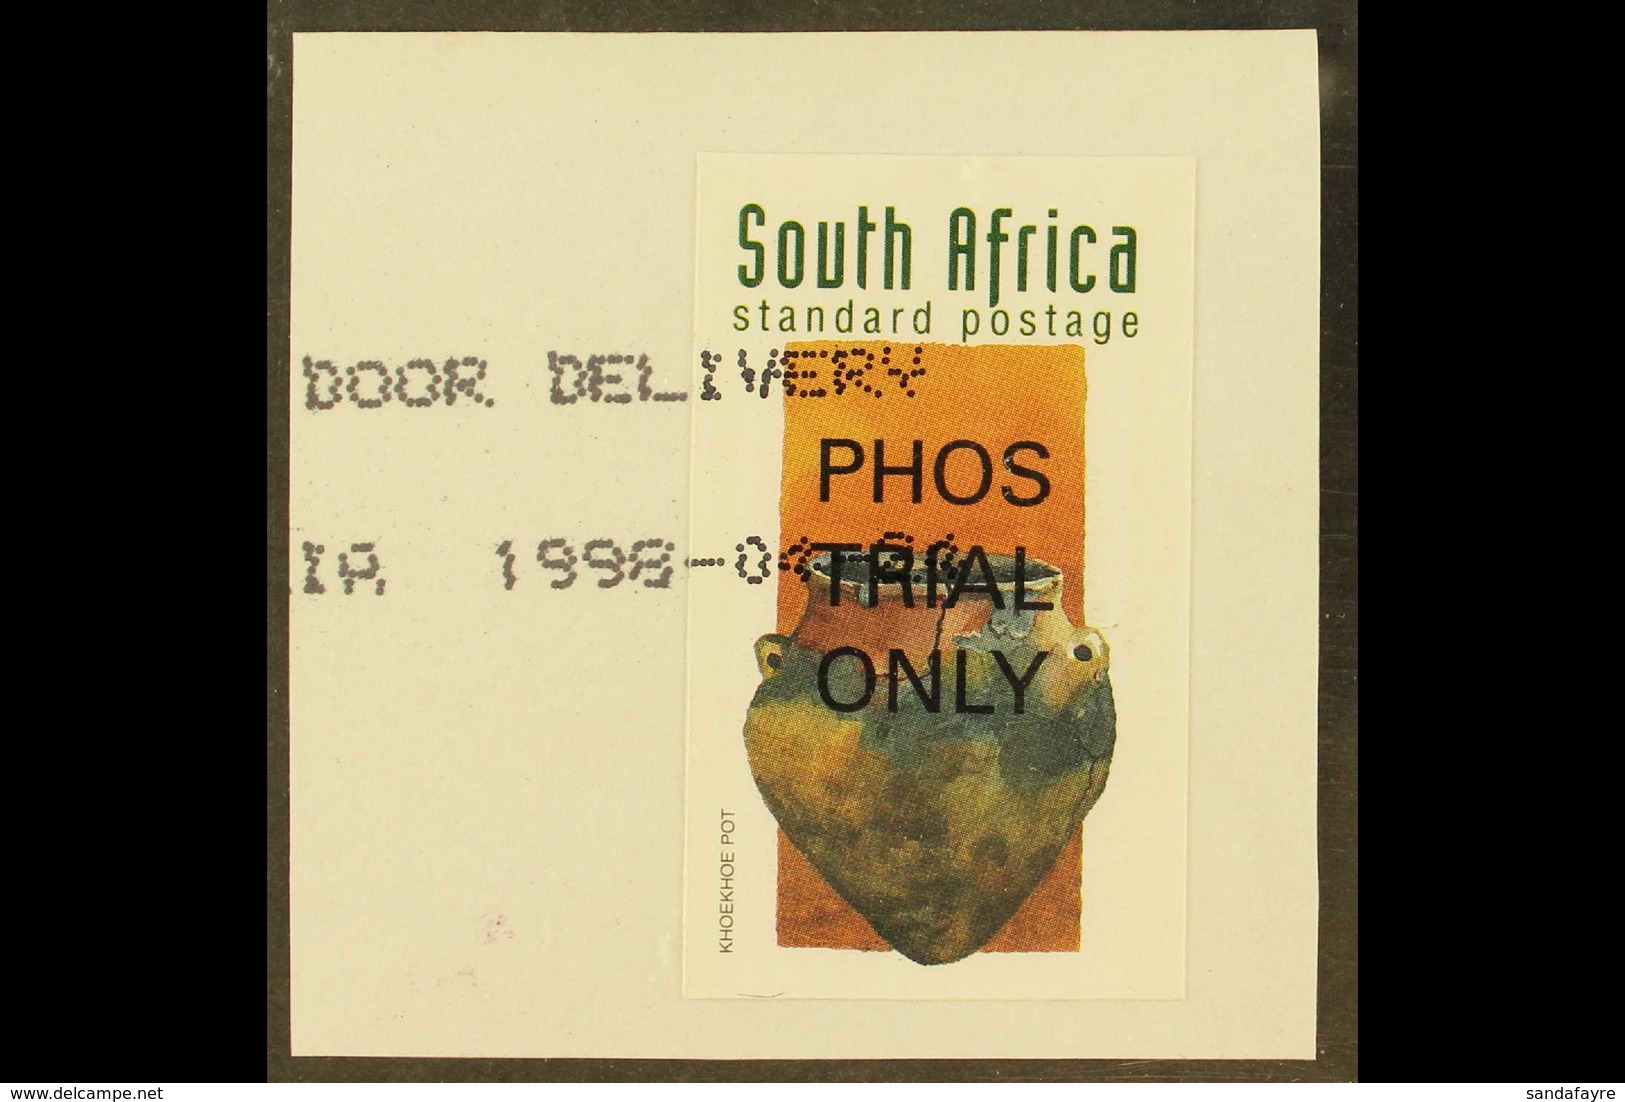 1998 Early South African History, Standard Postage (1r.10) Khoekhoe Pot, IMPERFORATE Single Overprinted "PHOS TRIAL ONLY - Sin Clasificación